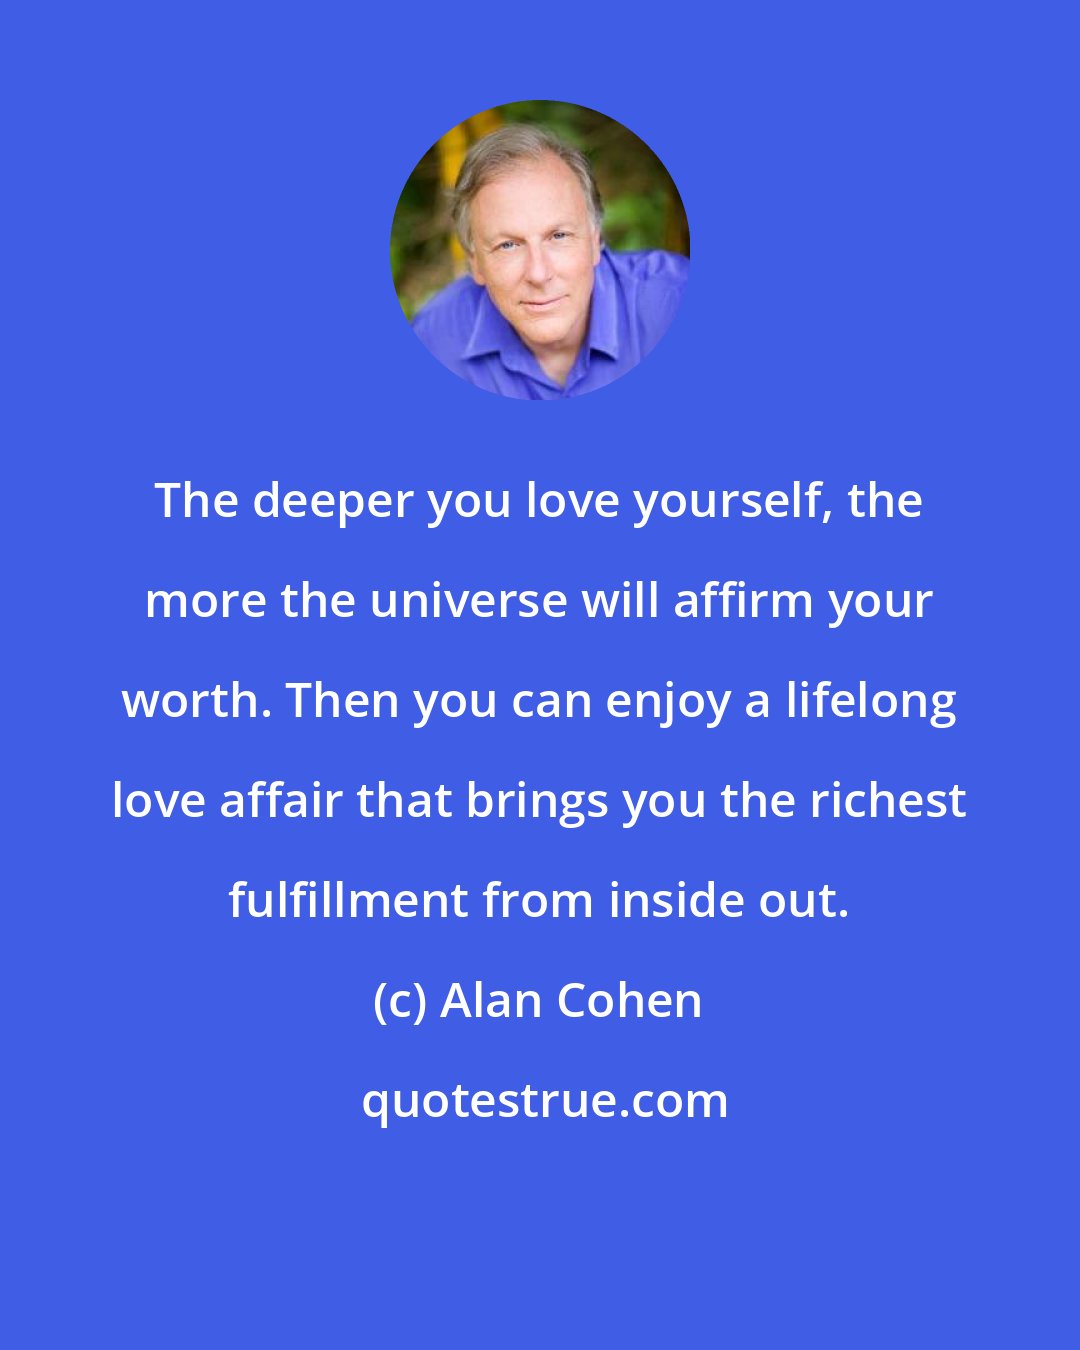 Alan Cohen: The deeper you love yourself, the more the universe will affirm your worth. Then you can enjoy a lifelong love affair that brings you the richest fulfillment from inside out.